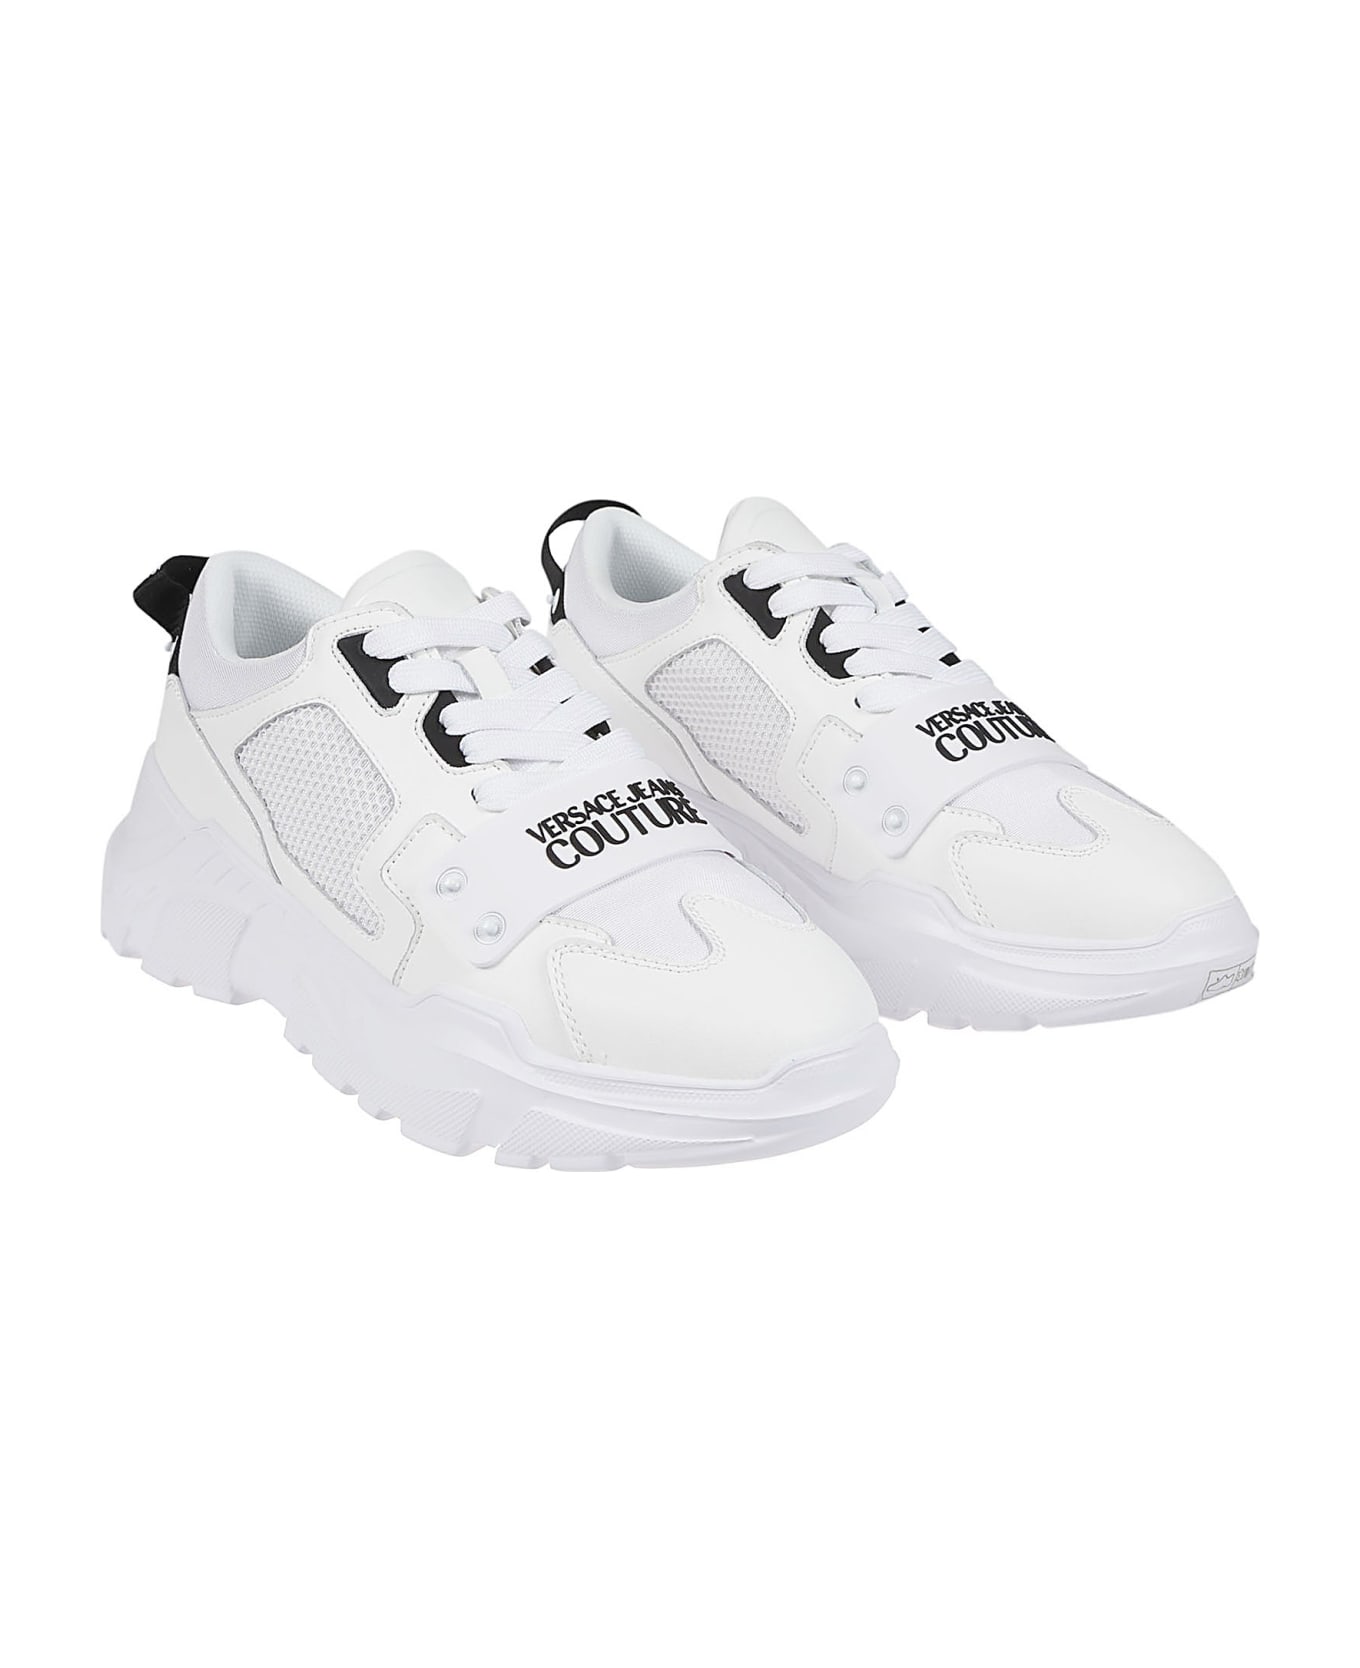 Versace Jeans Couture Speedtrack Sc4 Sneakers - White